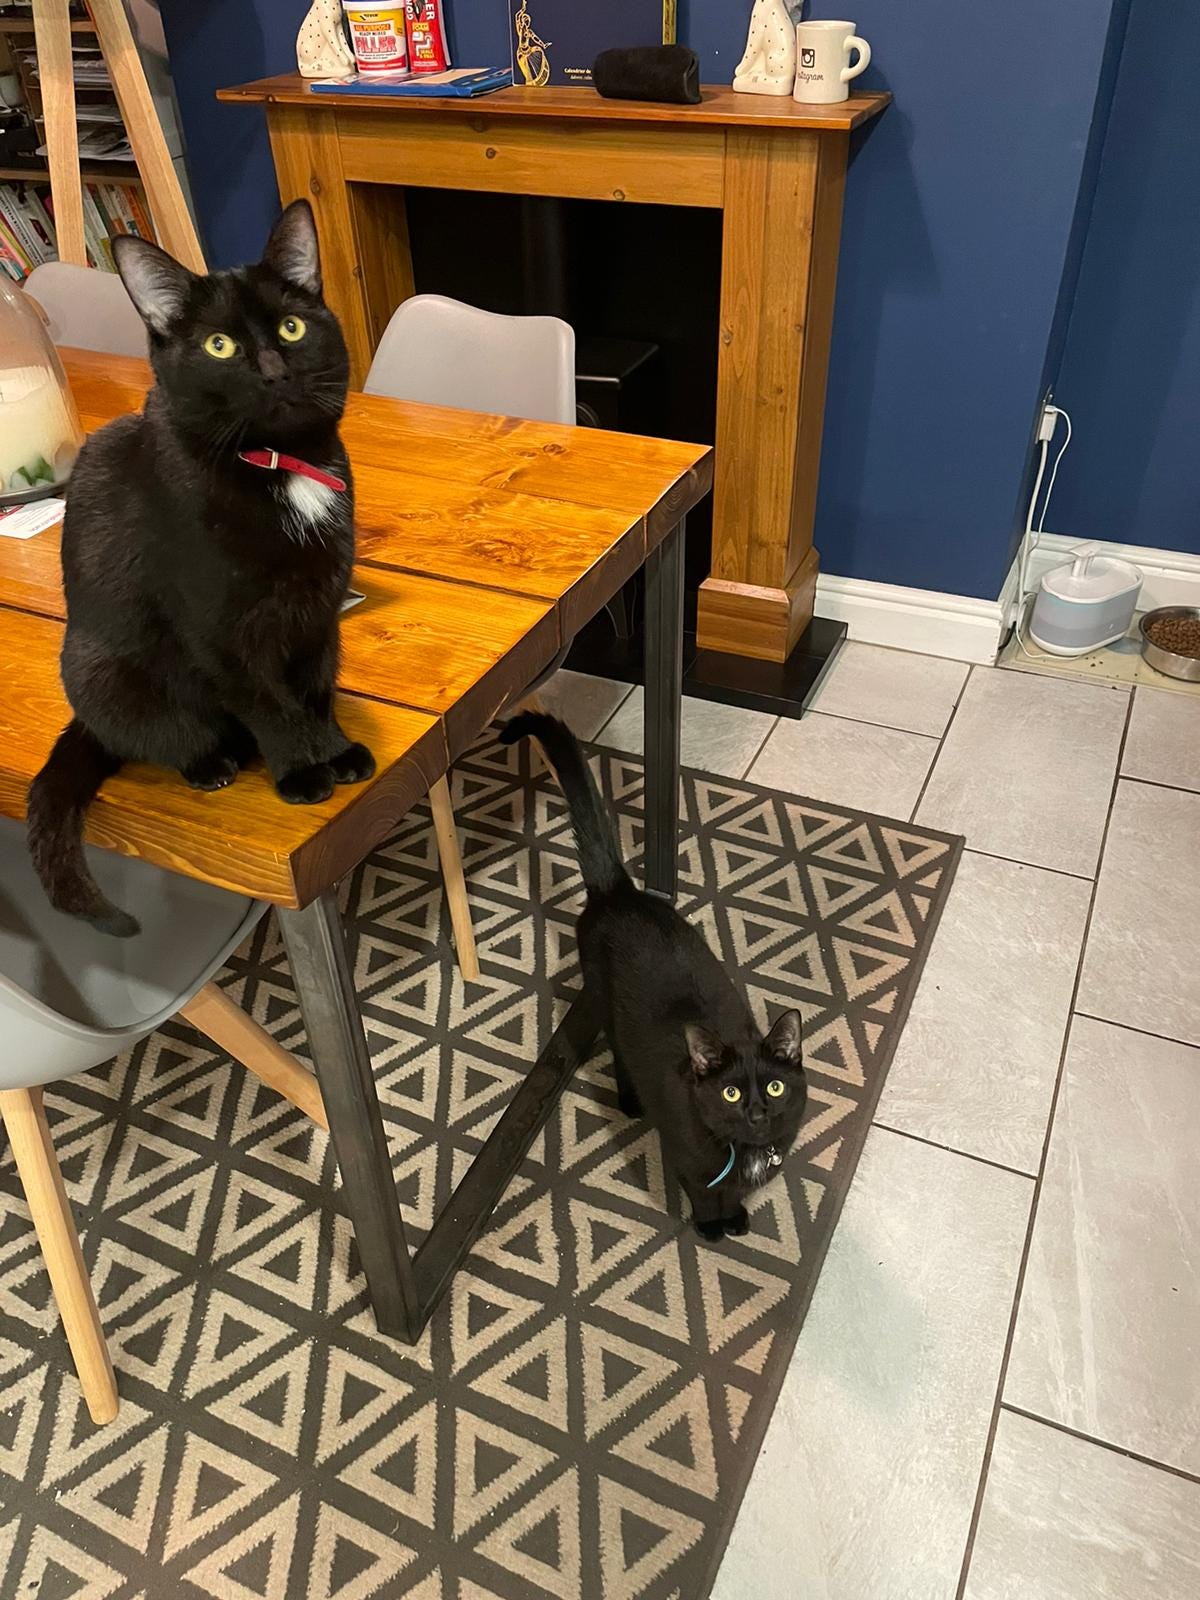 Two black cats looking up at the camera. One is perched on a table and has a red collar and white spot on his chest. The other is on a patterned rug and has a blue collar. 